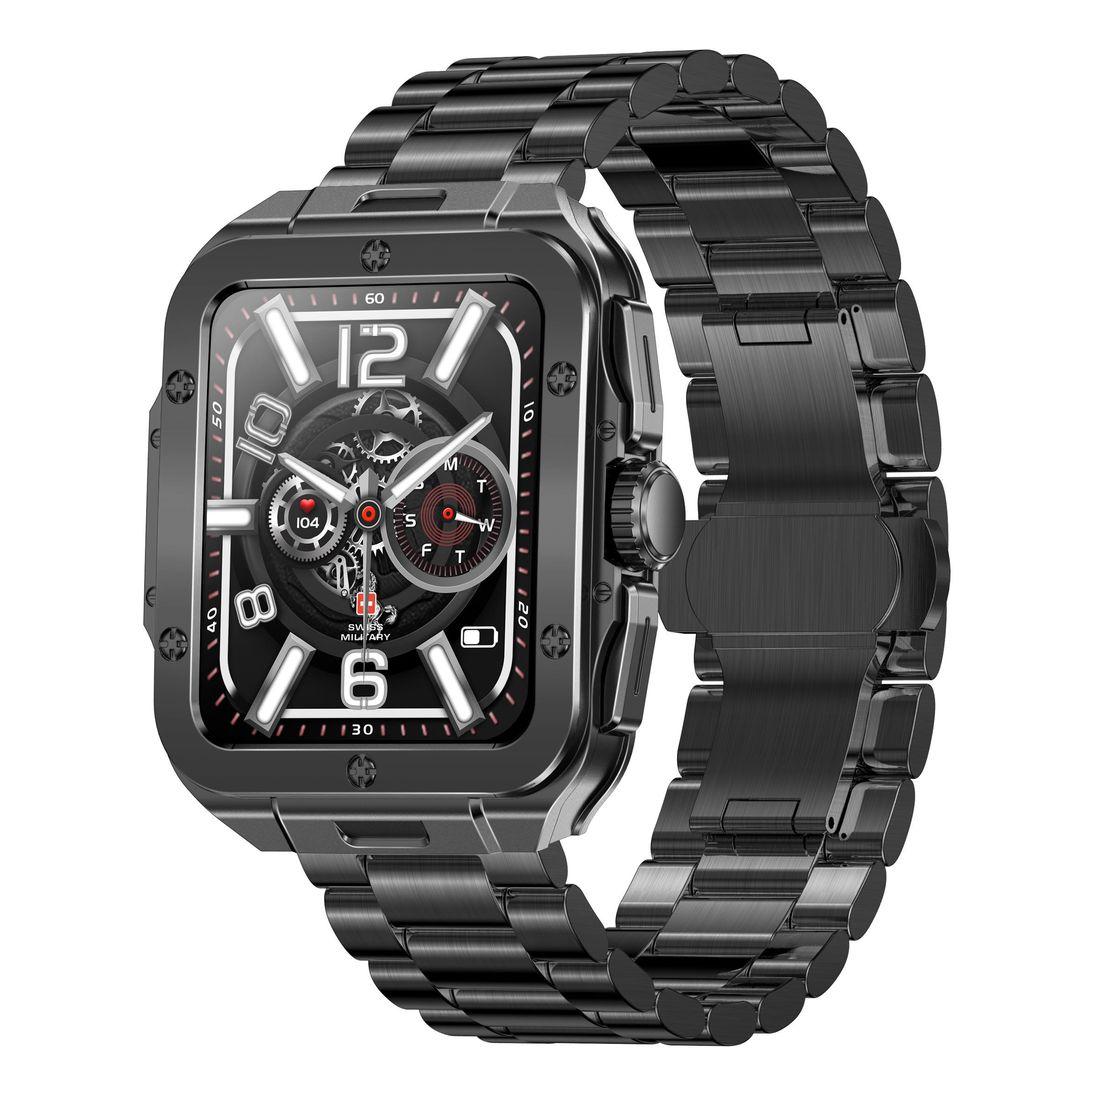 Swiss Military Alps 2 Smartwatch with Gunmetal Frame and Gun StainlessSteel Strap - фото 1 - id-p115279027